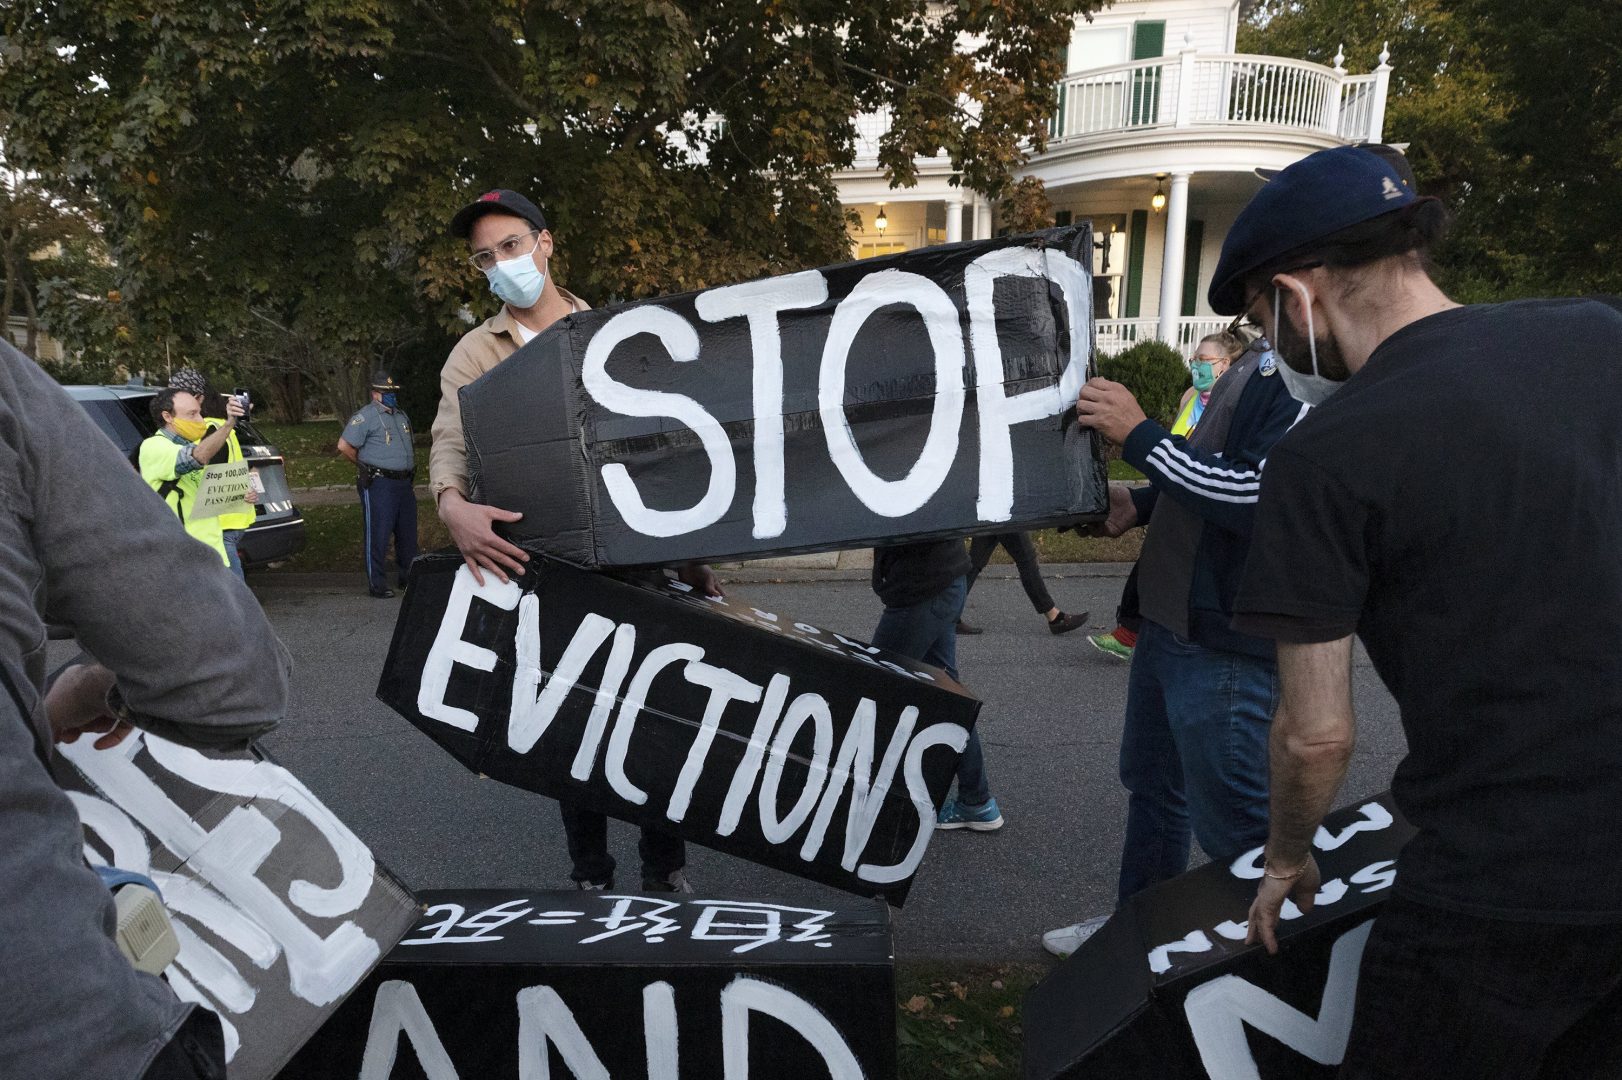 FILE PHOTO: Housing activists erect a sign in front of Massachusetts Gov. Charlie Baker's house in Swampscott, Mass. on Oct. 14, 2020.